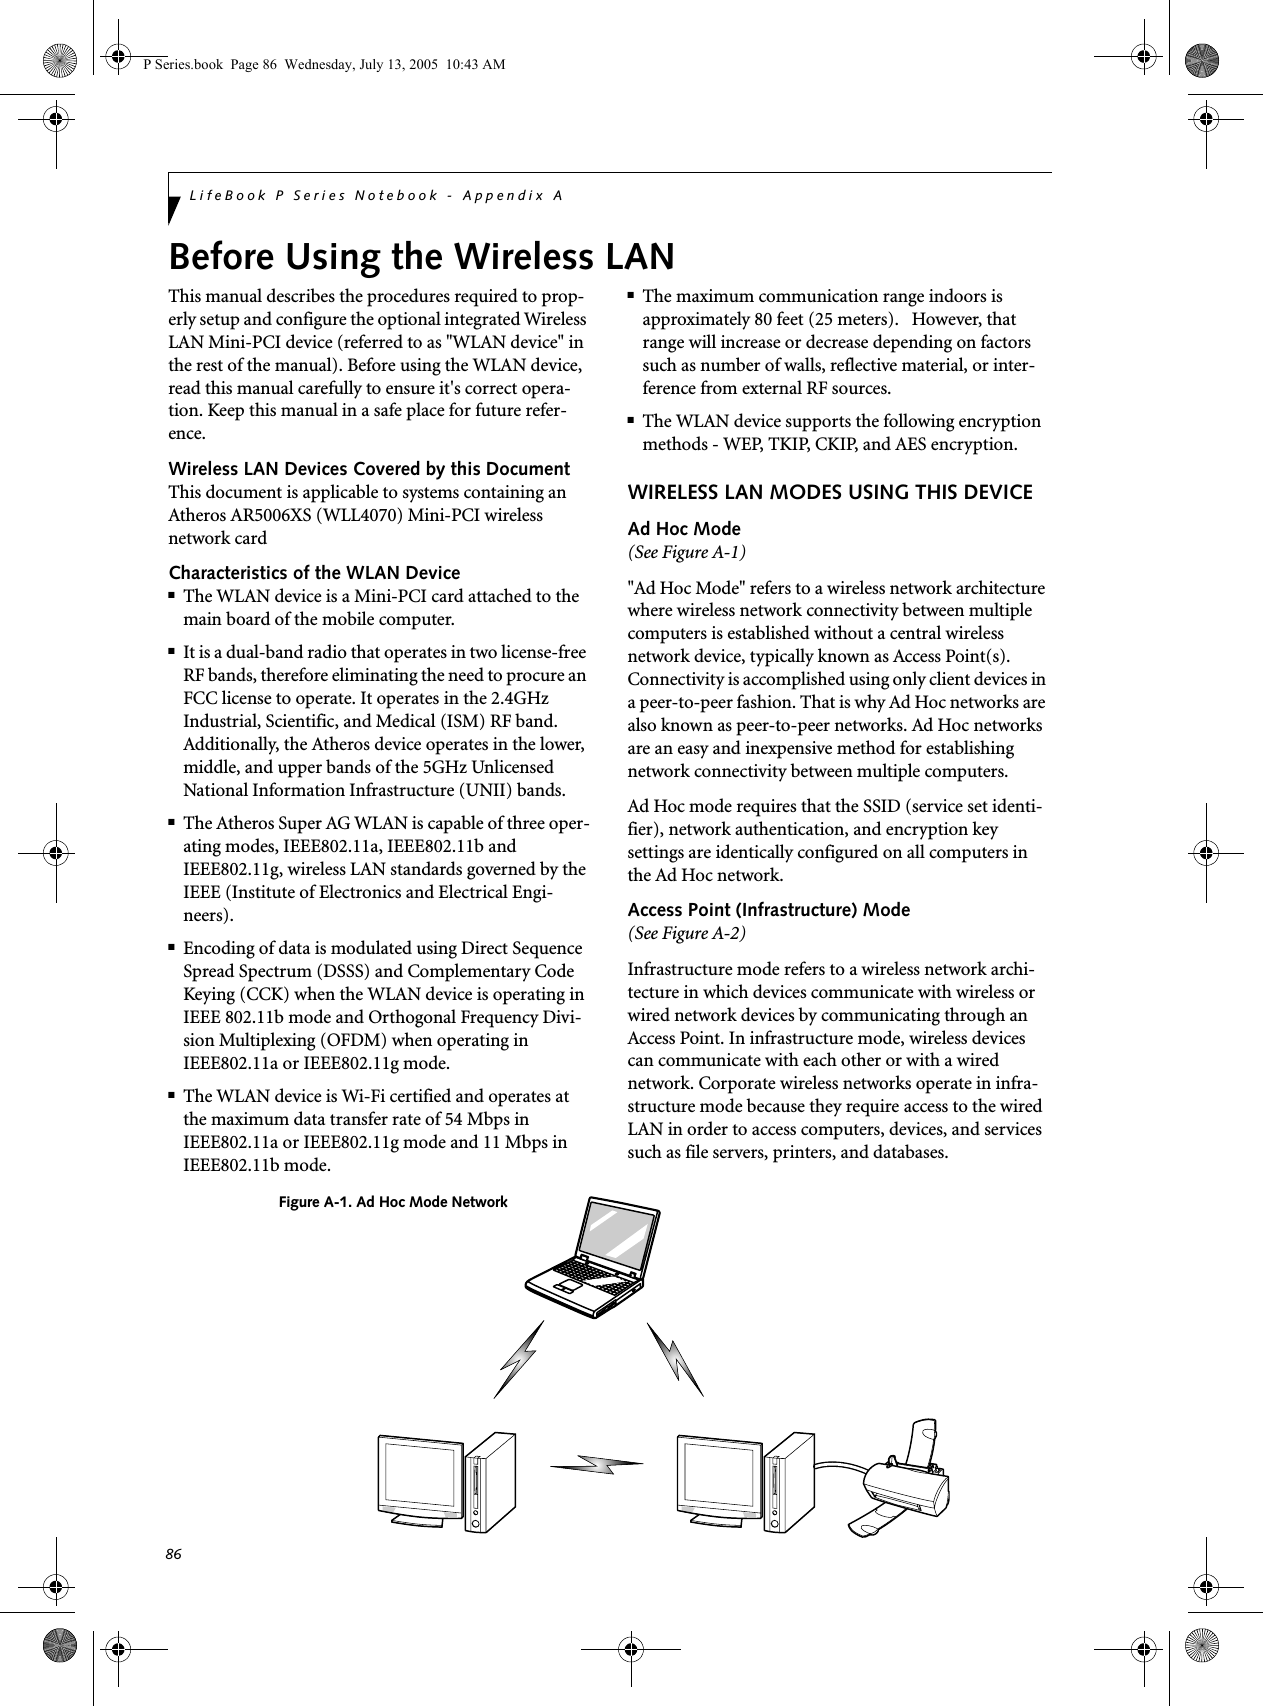 86LifeBook P Series Notebook - Appendix ABefore Using the Wireless LANThis manual describes the procedures required to prop-erly setup and configure the optional integrated Wireless LAN Mini-PCI device (referred to as &quot;WLAN device&quot; in the rest of the manual). Before using the WLAN device, read this manual carefully to ensure it&apos;s correct opera-tion. Keep this manual in a safe place for future refer-ence.Wireless LAN Devices Covered by this DocumentThis document is applicable to systems containing an Atheros AR5006XS (WLL4070) Mini-PCI wireless network cardCharacteristics of the WLAN Device■The WLAN device is a Mini-PCI card attached to the main board of the mobile computer. ■It is a dual-band radio that operates in two license-free RF bands, therefore eliminating the need to procure an FCC license to operate. It operates in the 2.4GHz Industrial, Scientific, and Medical (ISM) RF band. Additionally, the Atheros device operates in the lower, middle, and upper bands of the 5GHz Unlicensed National Information Infrastructure (UNII) bands. ■The Atheros Super AG WLAN is capable of three oper-ating modes, IEEE802.11a, IEEE802.11b and IEEE802.11g, wireless LAN standards governed by the IEEE (Institute of Electronics and Electrical Engi-neers). ■Encoding of data is modulated using Direct Sequence Spread Spectrum (DSSS) and Complementary Code Keying (CCK) when the WLAN device is operating in IEEE 802.11b mode and Orthogonal Frequency Divi-sion Multiplexing (OFDM) when operating in IEEE802.11a or IEEE802.11g mode. ■The WLAN device is Wi-Fi certified and operates at the maximum data transfer rate of 54 Mbps in IEEE802.11a or IEEE802.11g mode and 11 Mbps in IEEE802.11b mode.■The maximum communication range indoors is approximately 80 feet (25 meters).   However, that range will increase or decrease depending on factors such as number of walls, reflective material, or inter-ference from external RF sources.■The WLAN device supports the following encryption methods - WEP, TKIP, CKIP, and AES encryption.WIRELESS LAN MODES USING THIS DEVICEAd Hoc Mode (See Figure A-1)&quot;Ad Hoc Mode&quot; refers to a wireless network architecture where wireless network connectivity between multiple computers is established without a central wireless network device, typically known as Access Point(s). Connectivity is accomplished using only client devices in a peer-to-peer fashion. That is why Ad Hoc networks are also known as peer-to-peer networks. Ad Hoc networks are an easy and inexpensive method for establishing network connectivity between multiple computers.Ad Hoc mode requires that the SSID (service set identi-fier), network authentication, and encryption key settings are identically configured on all computers in the Ad Hoc network. Access Point (Infrastructure) Mode (See Figure A-2)Infrastructure mode refers to a wireless network archi-tecture in which devices communicate with wireless or wired network devices by communicating through an Access Point. In infrastructure mode, wireless devices can communicate with each other or with a wired network. Corporate wireless networks operate in infra-structure mode because they require access to the wired LAN in order to access computers, devices, and services such as file servers, printers, and databases.Figure A-1. Ad Hoc Mode NetworkP Series.book  Page 86  Wednesday, July 13, 2005  10:43 AM